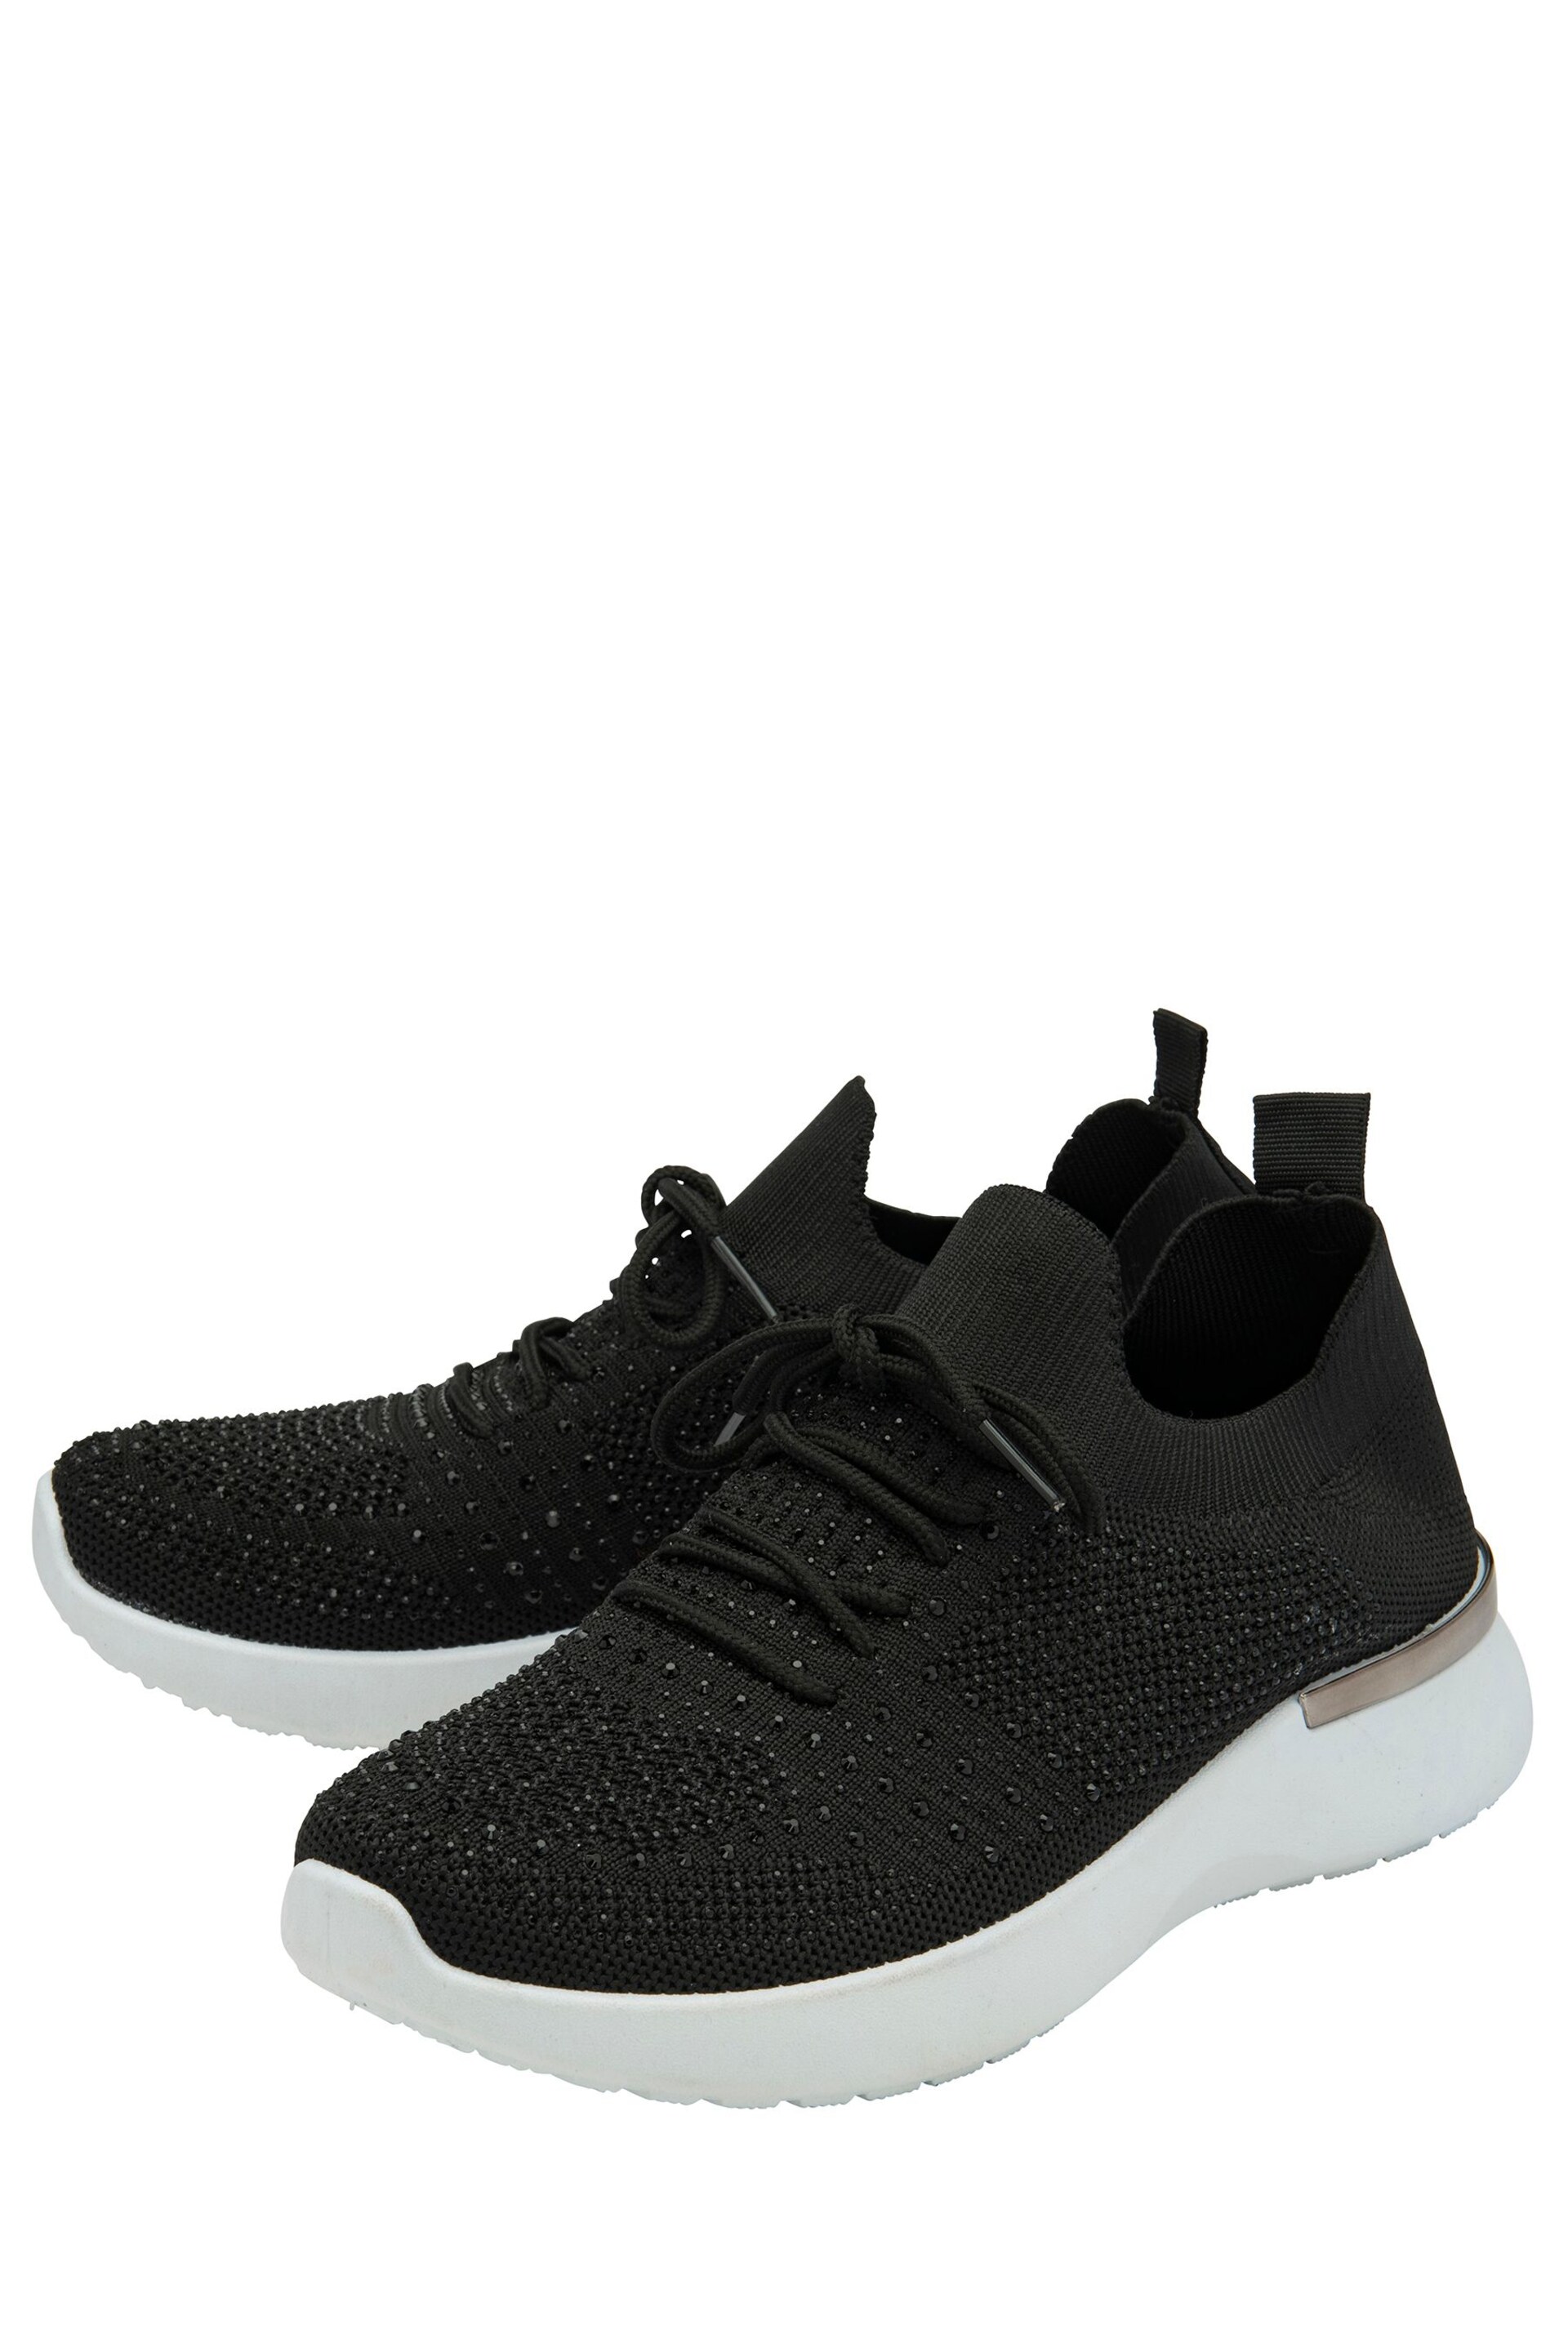 Lotus Black Casual Knit Trainers - Image 2 of 4